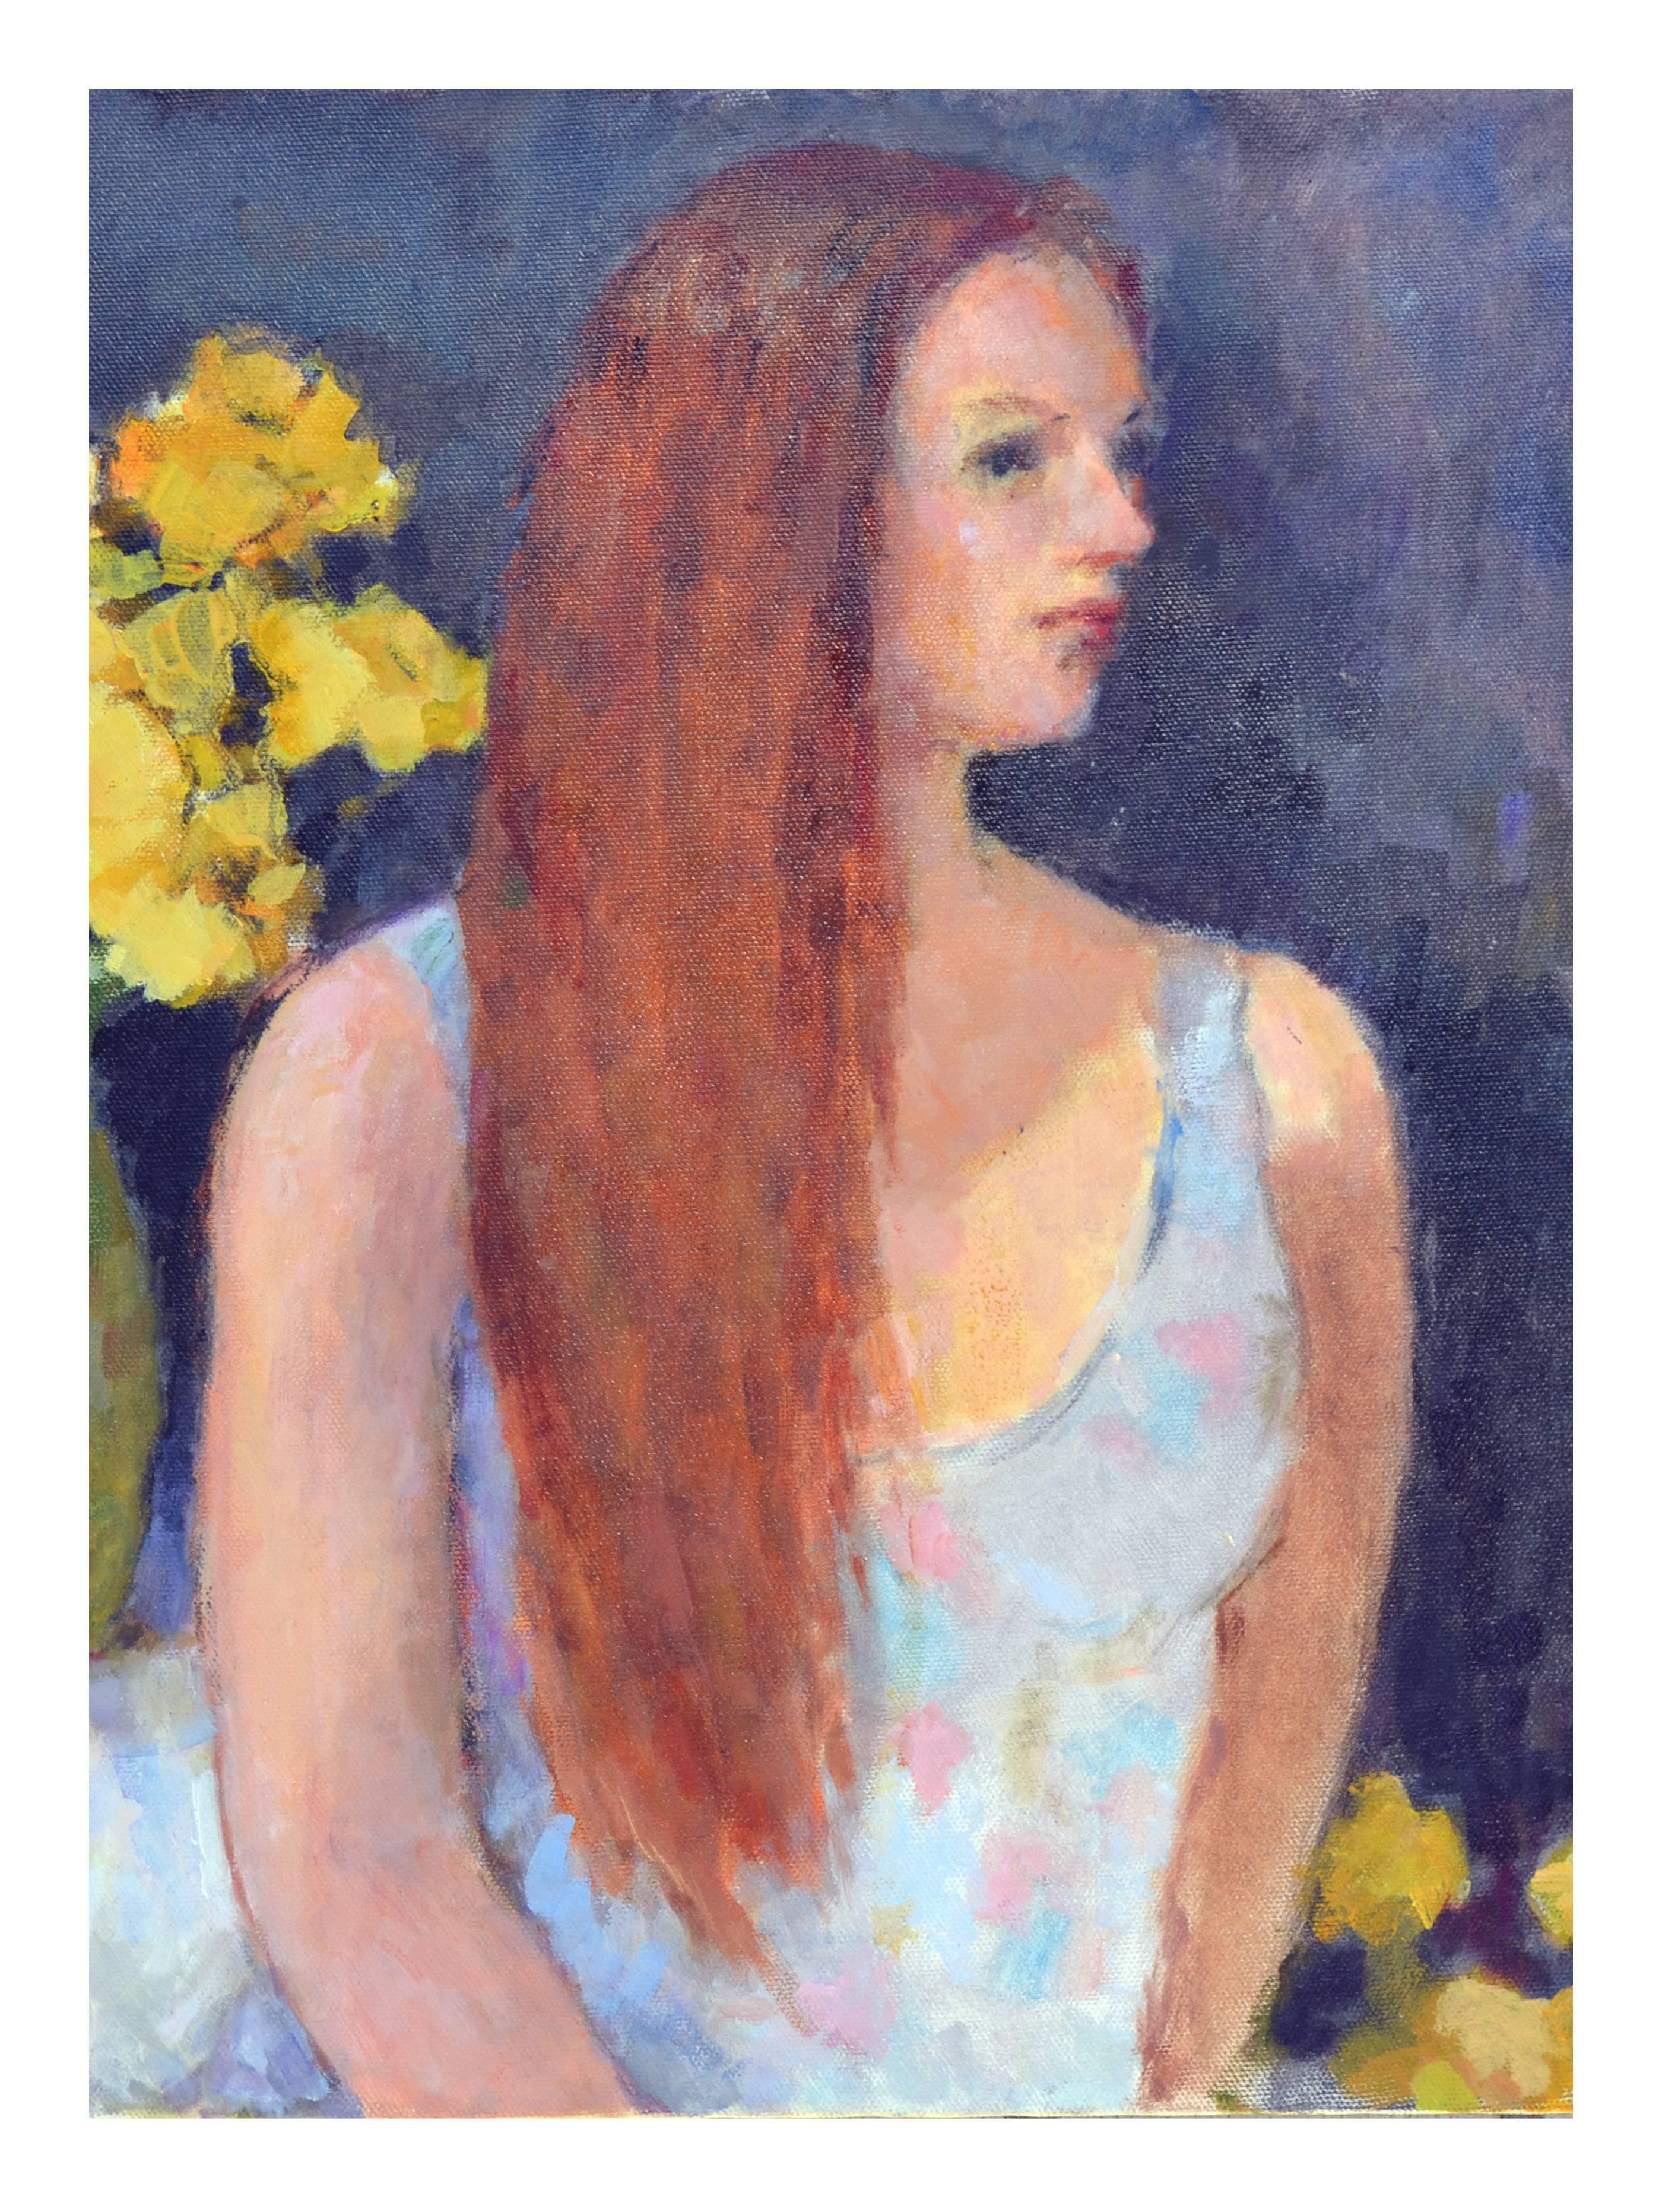 Vintage Portrait of Red Headed Woman with Yellow Roses - Painting by Patricia Emrich Gillfillan